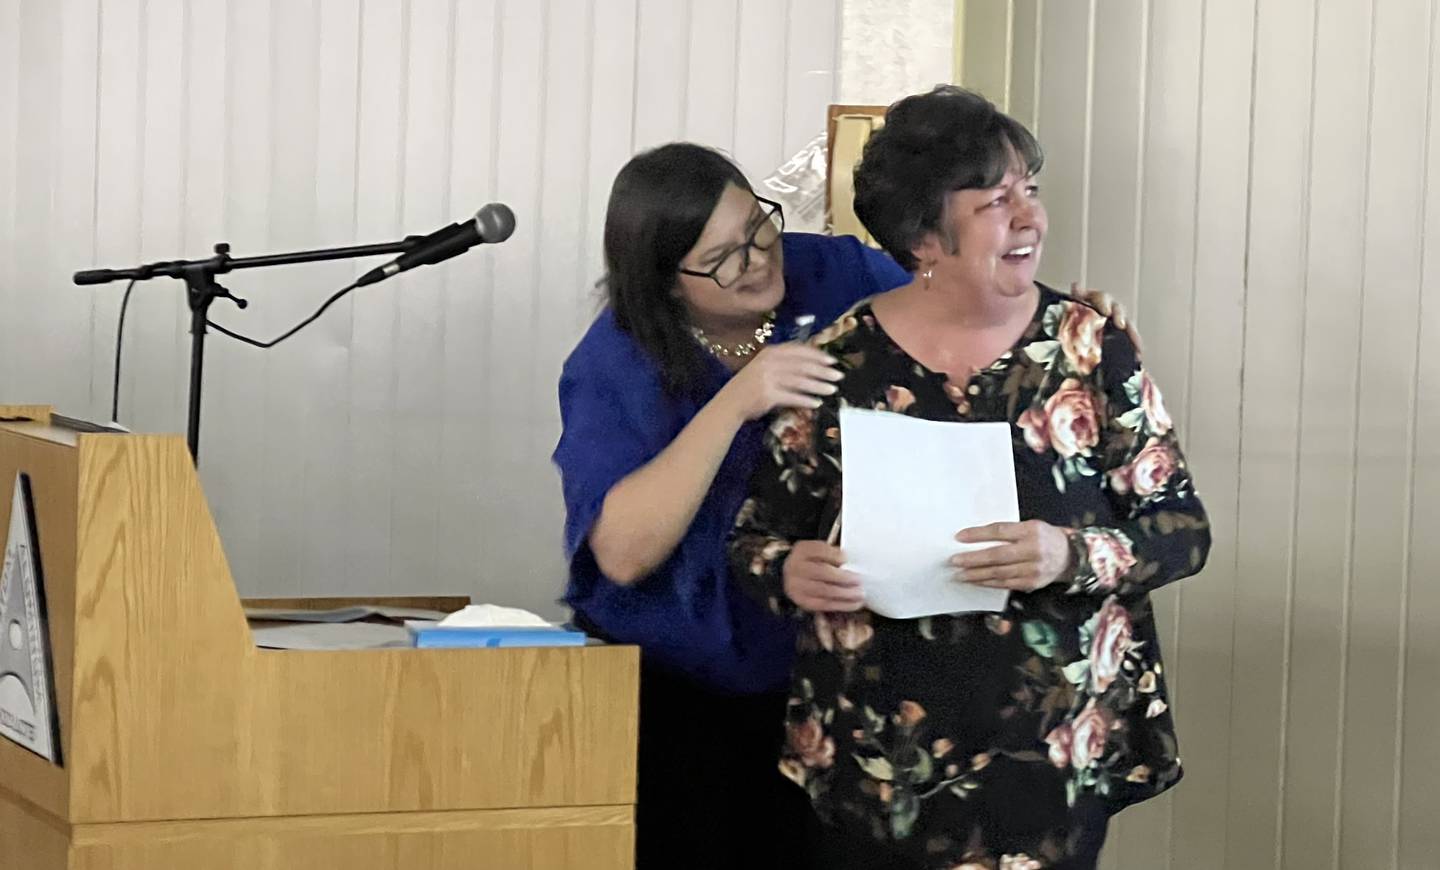 Carolyn Tobinson, right, the daughter of Dave Tobinson, reacts as Krissy Johnson, left announced her as the winner of Genoa Chamber of Commerce's 2022 Dave Tobinson, Outstanding Member of the Year Award on Feb. 15, 2023.